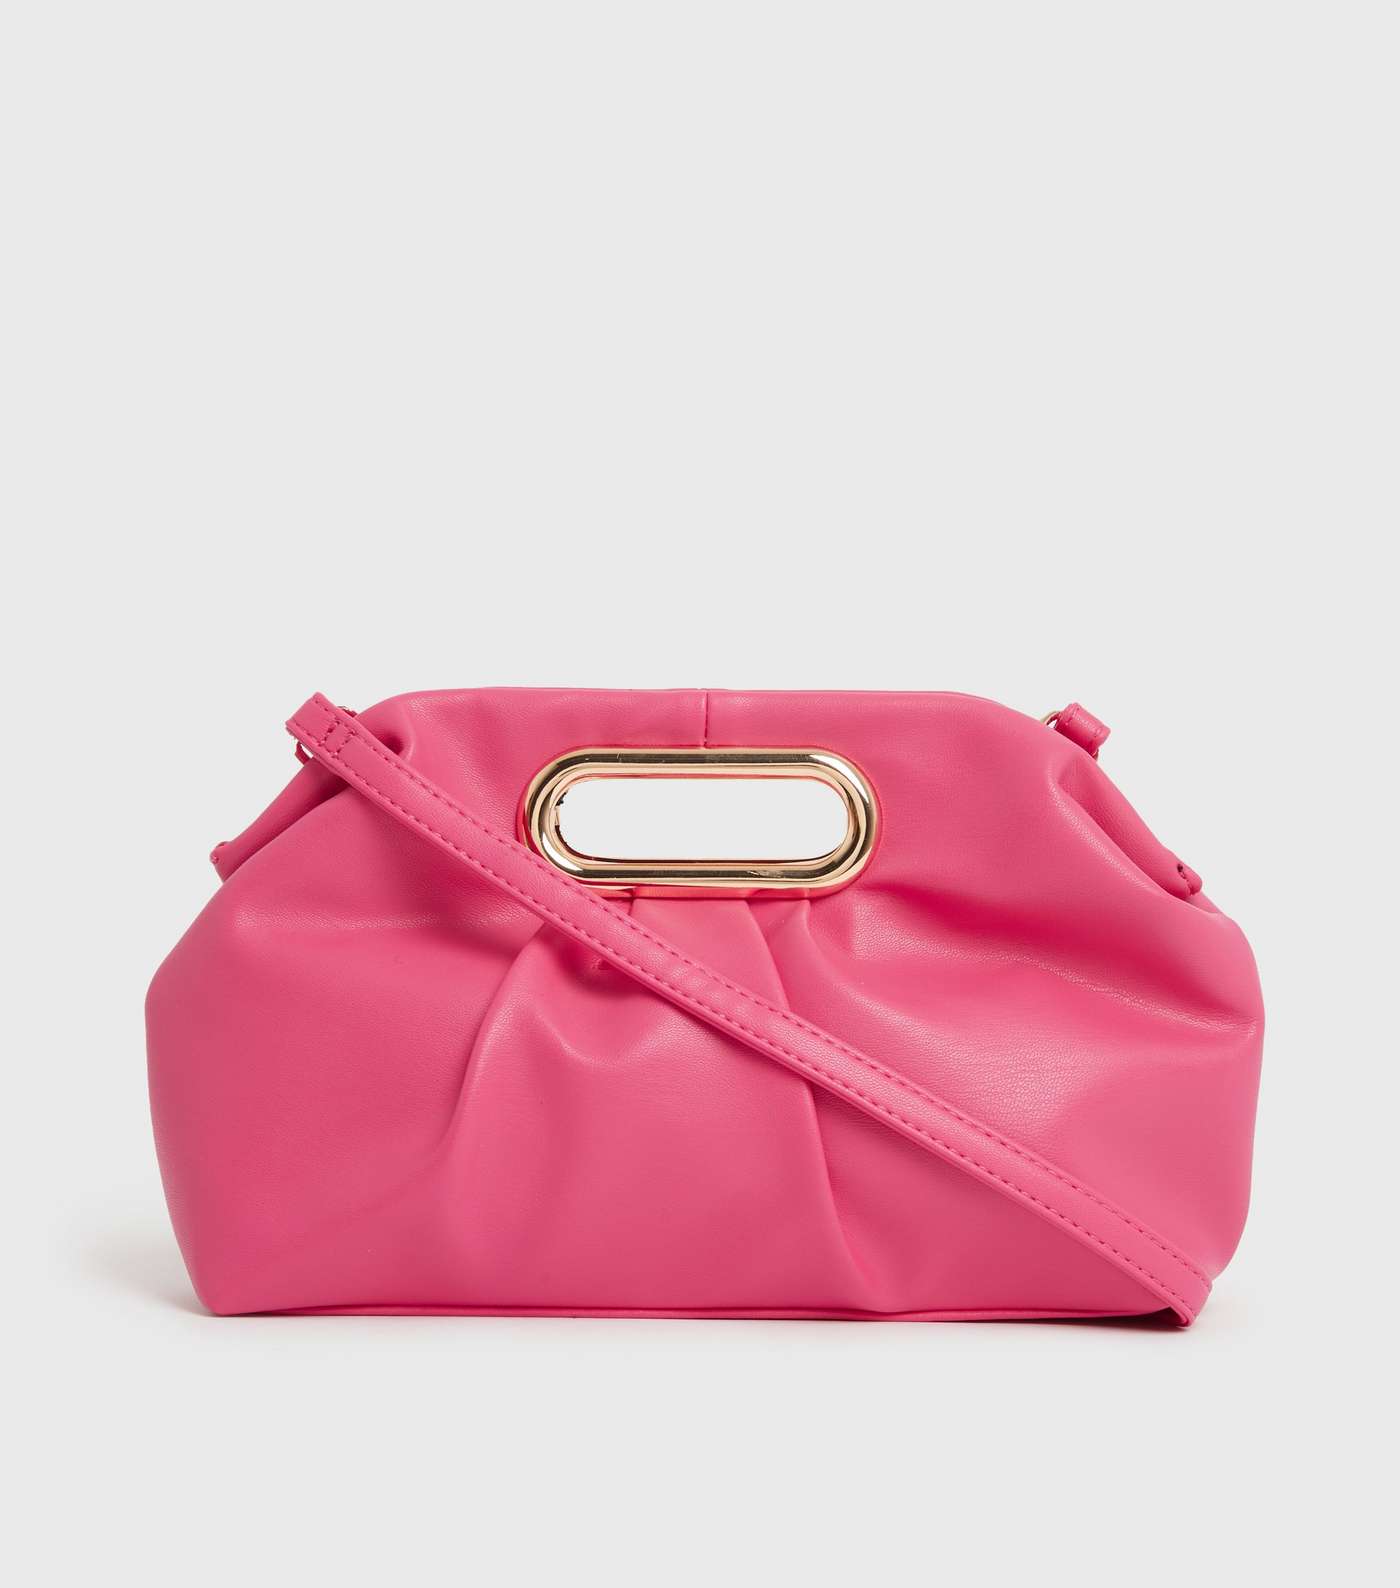 Bright Pink Leather-Look Ruched Clutch Bag